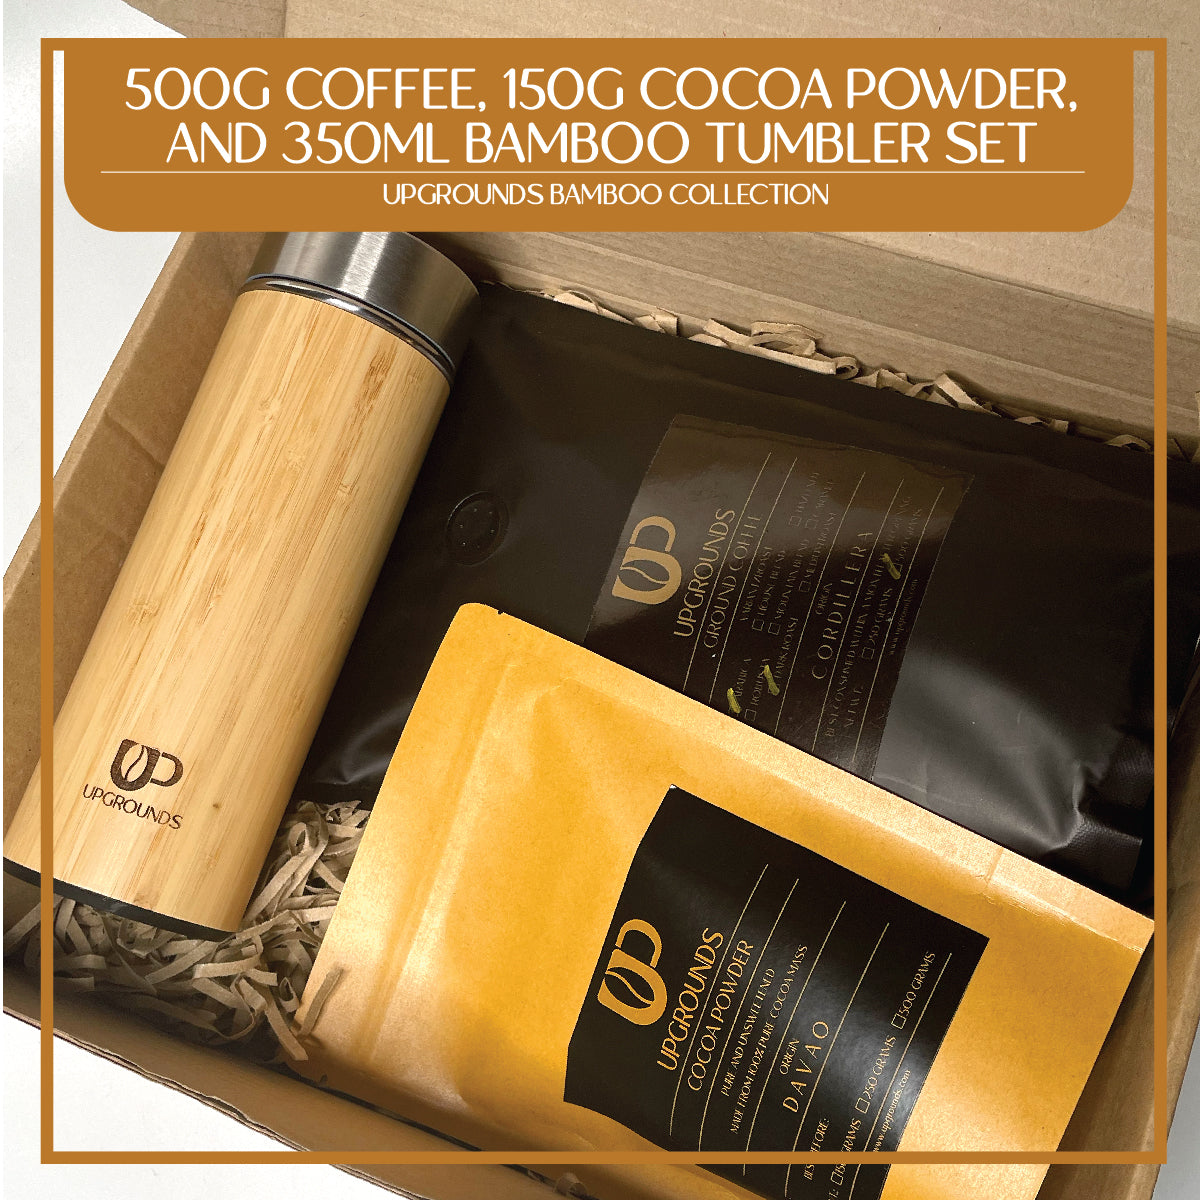 500g Coffee, 150g Cocoa Powder and Bamboo Tumbler Set | Upgrounds